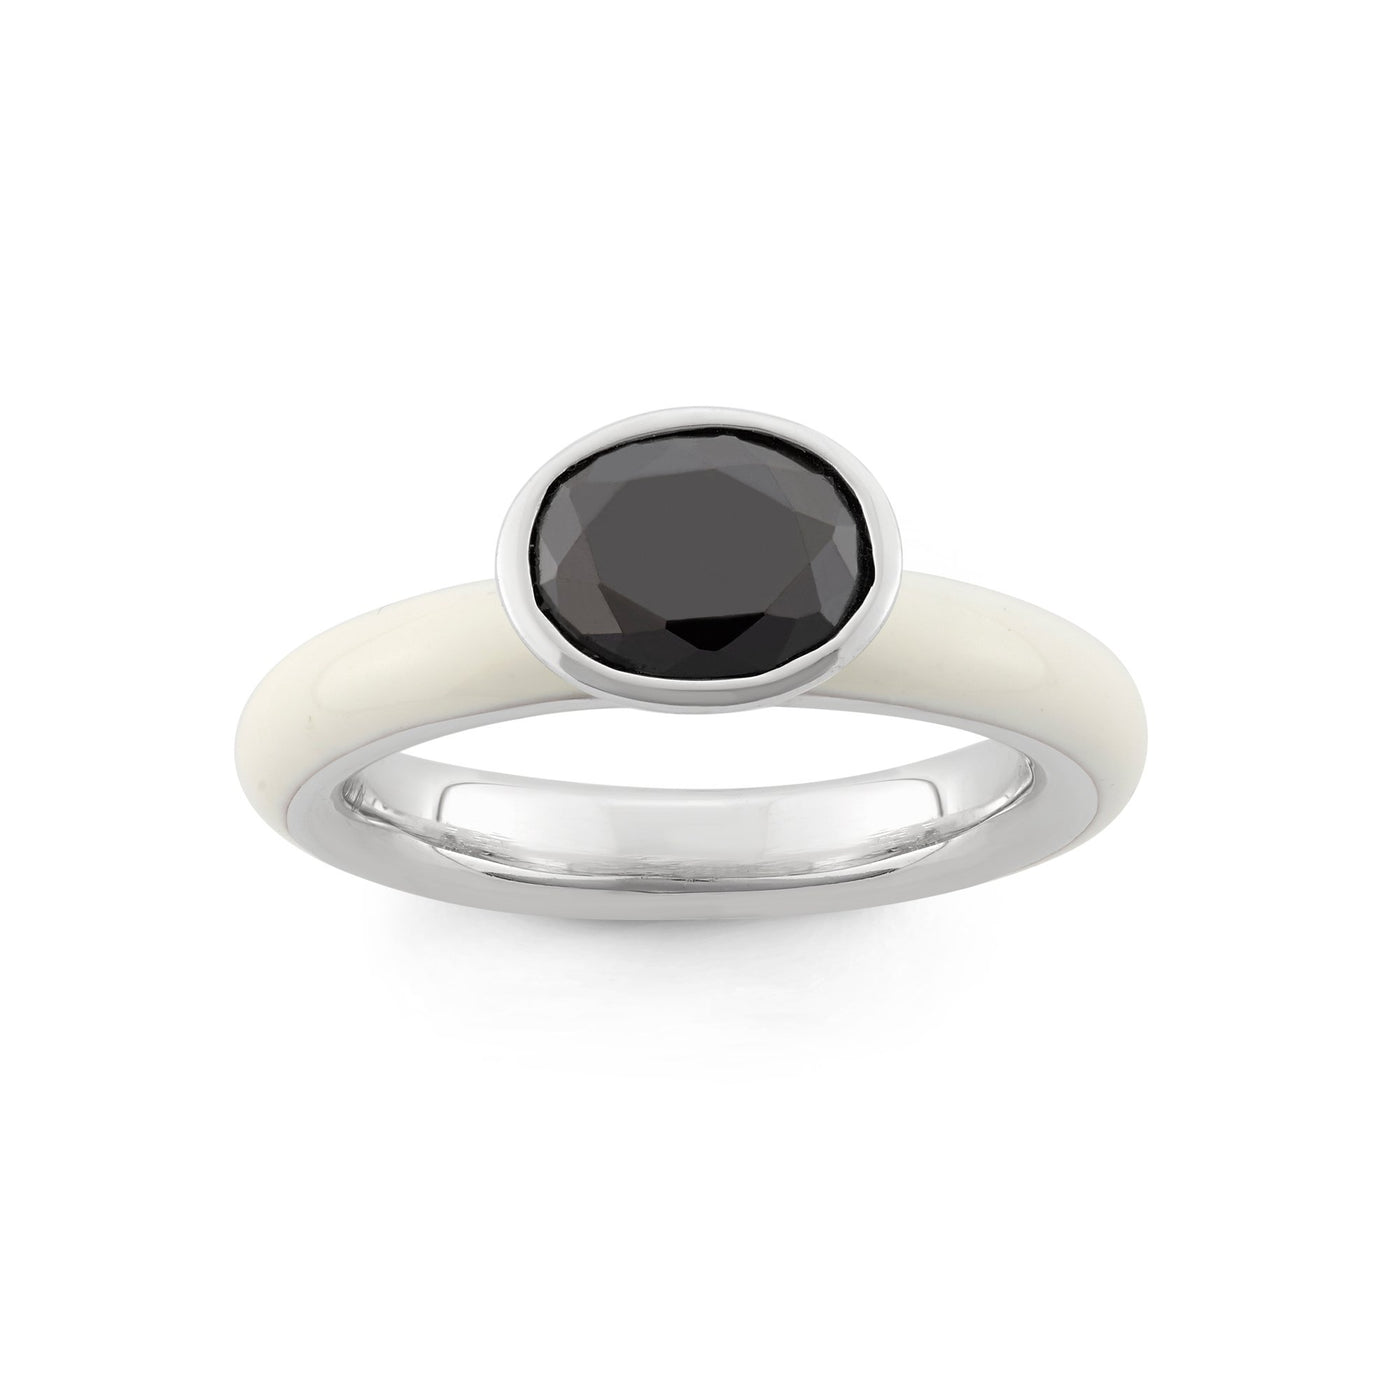 Sterling Silver Spinning Ring With White Lacquer and Black Oval CZ Center Stone